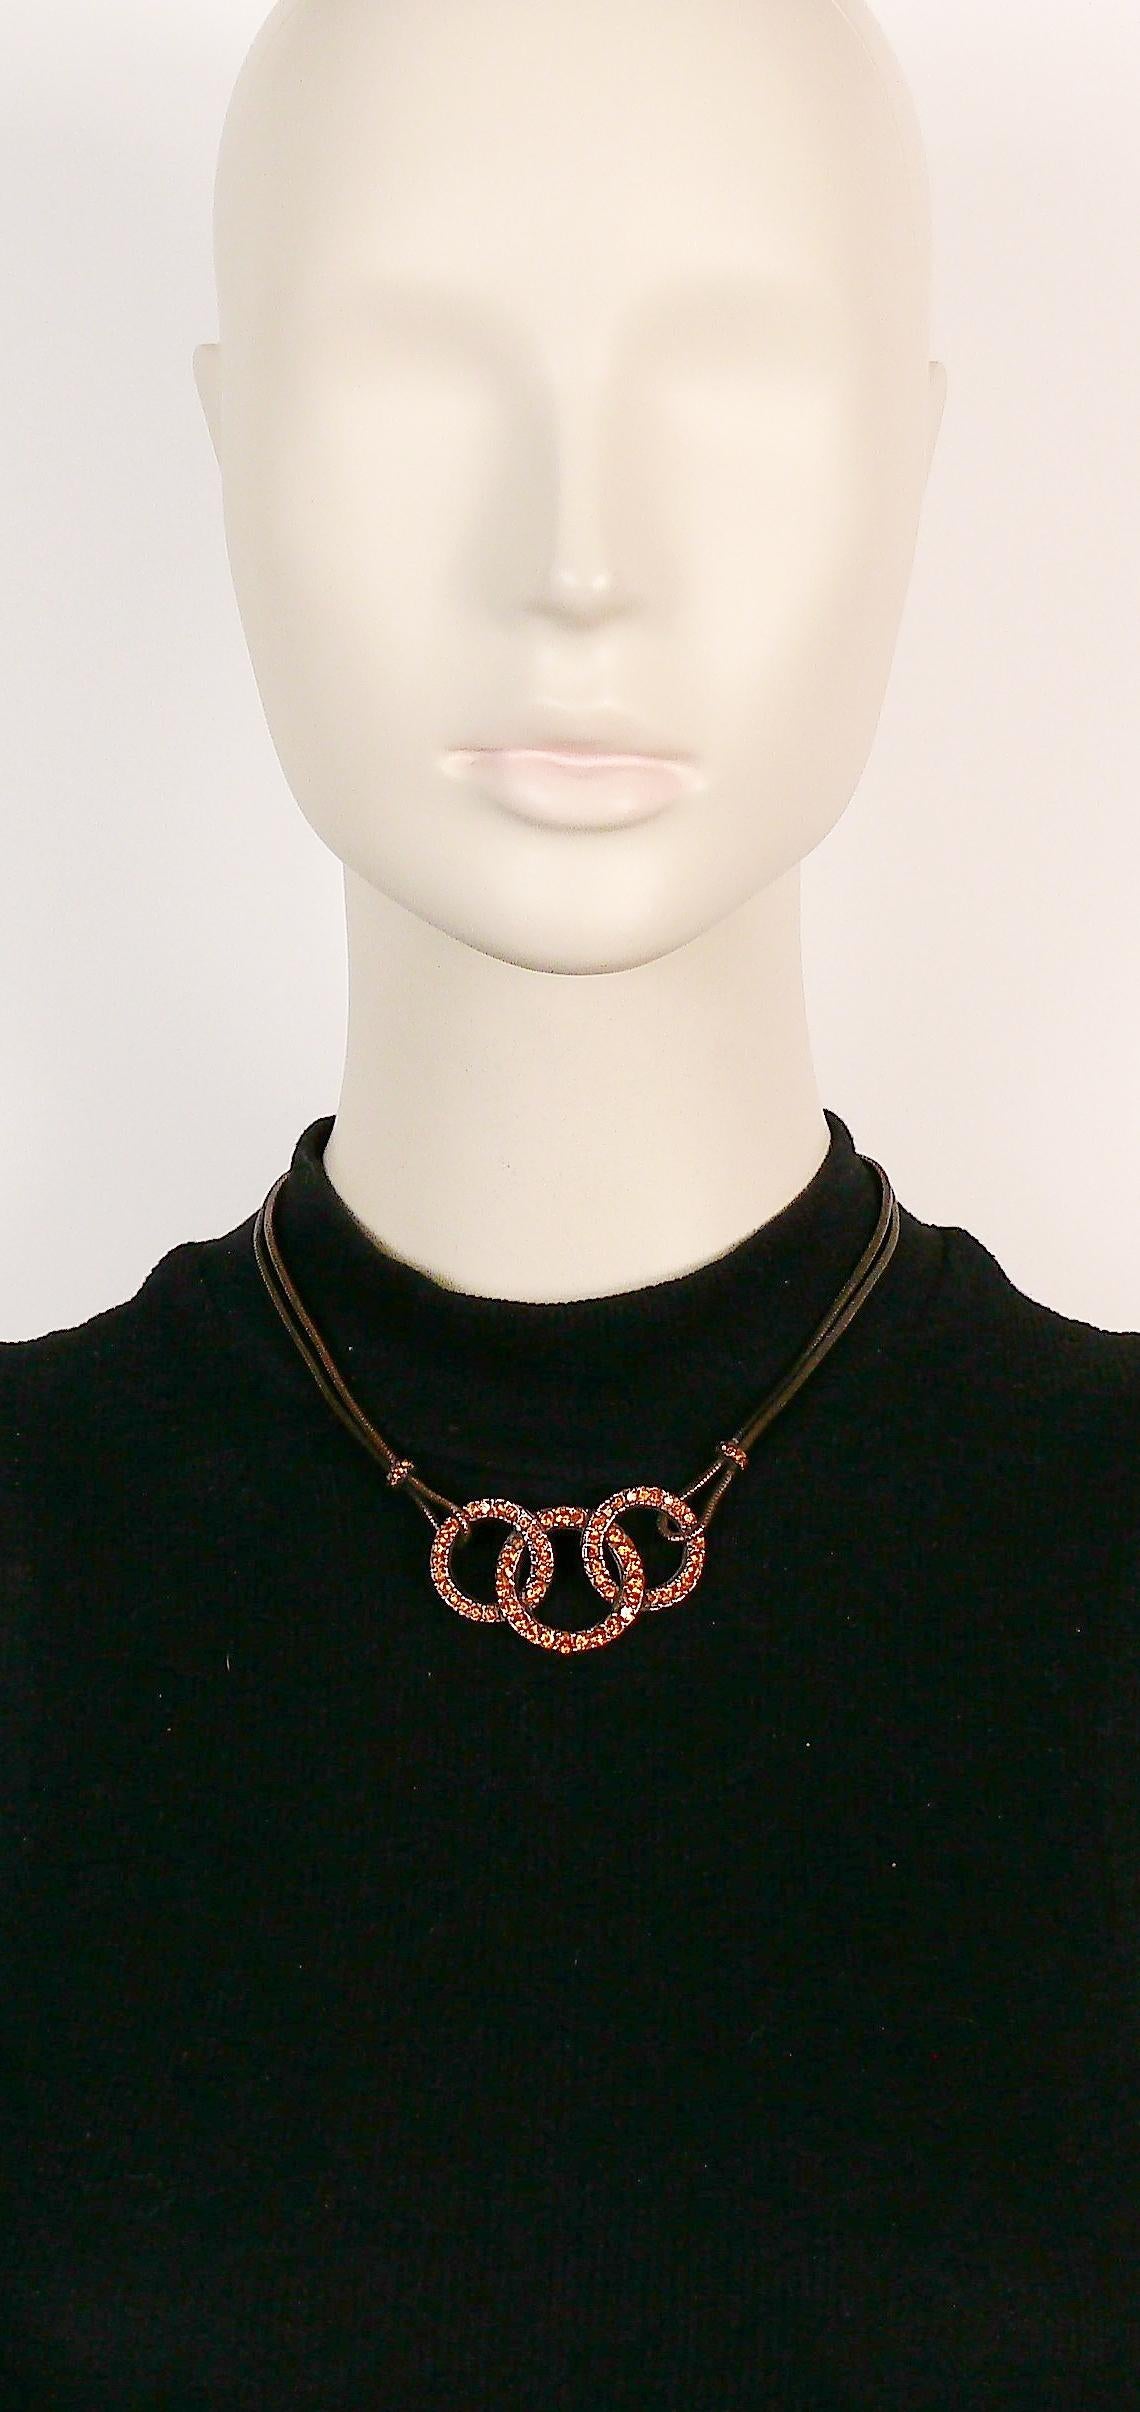 YVES SAINT LAURENT vintage antiqued copper toned necklace featuring a double snake chain and three intertwined rings embellished with citrine color crystals.

Adjustable T-bar and toggle closure.

Embossed YSL Made in France.

Indicative